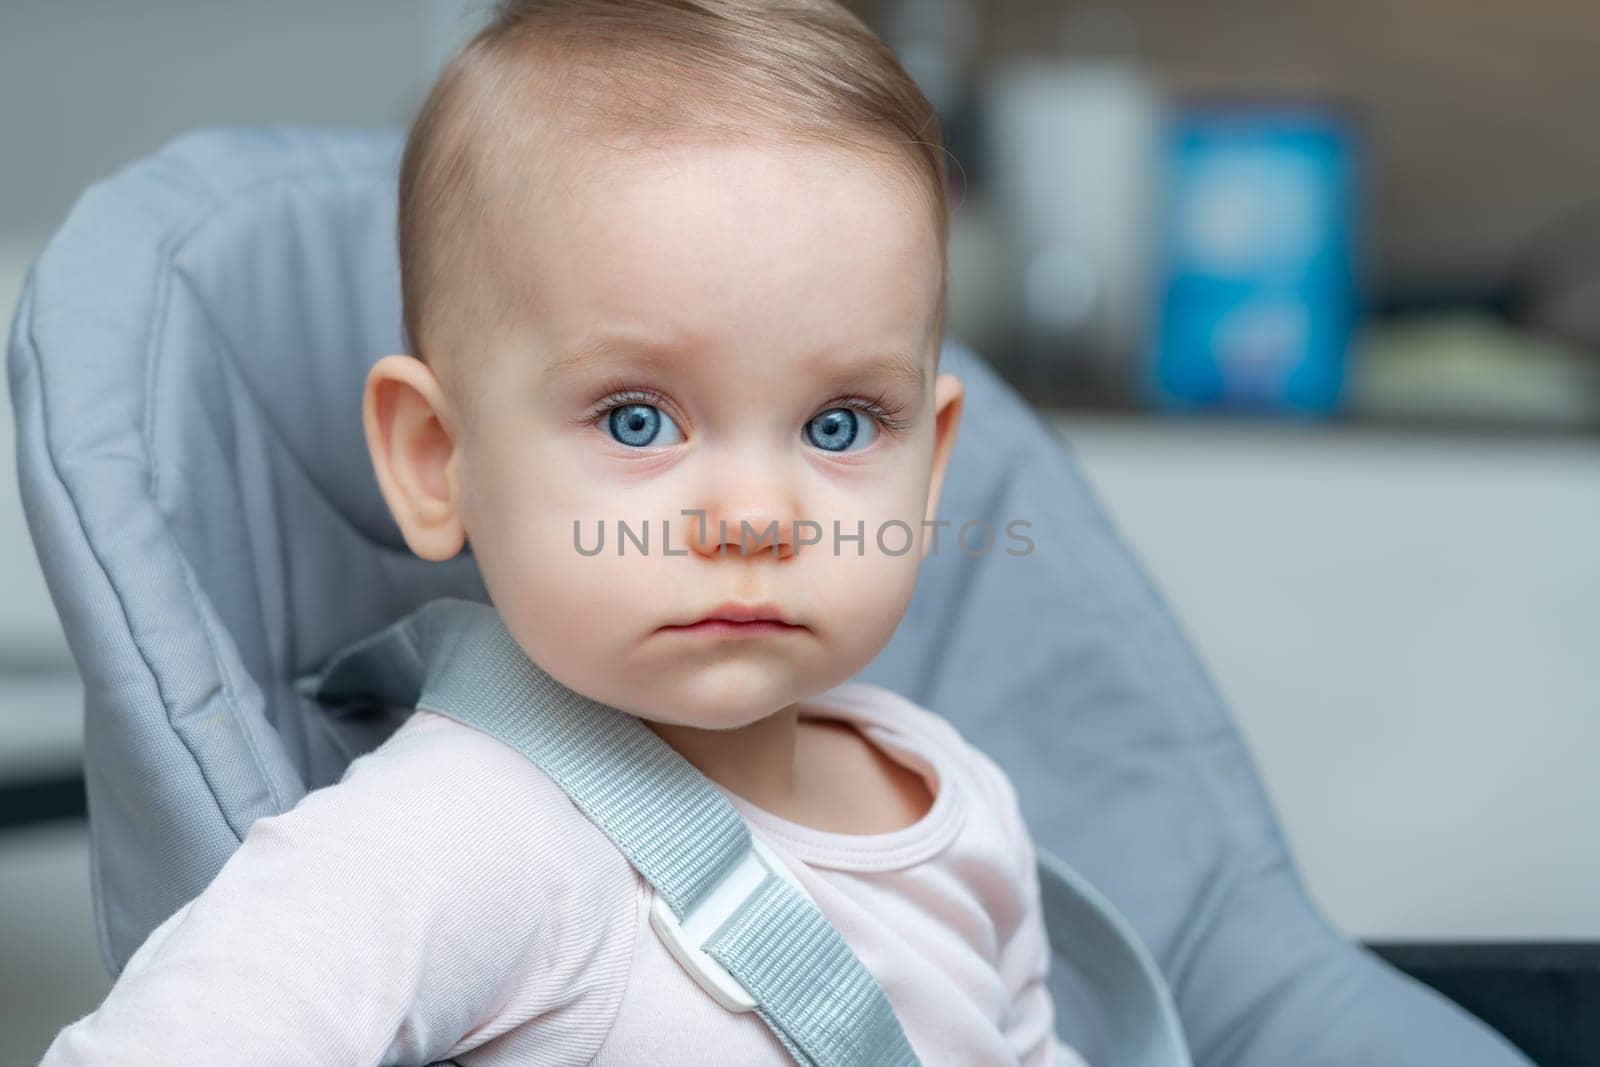 A baby with adorable cheeks and a cute hairstyle is sitting in a seat, looking directly at the camera with their bright iris and long eyelashes